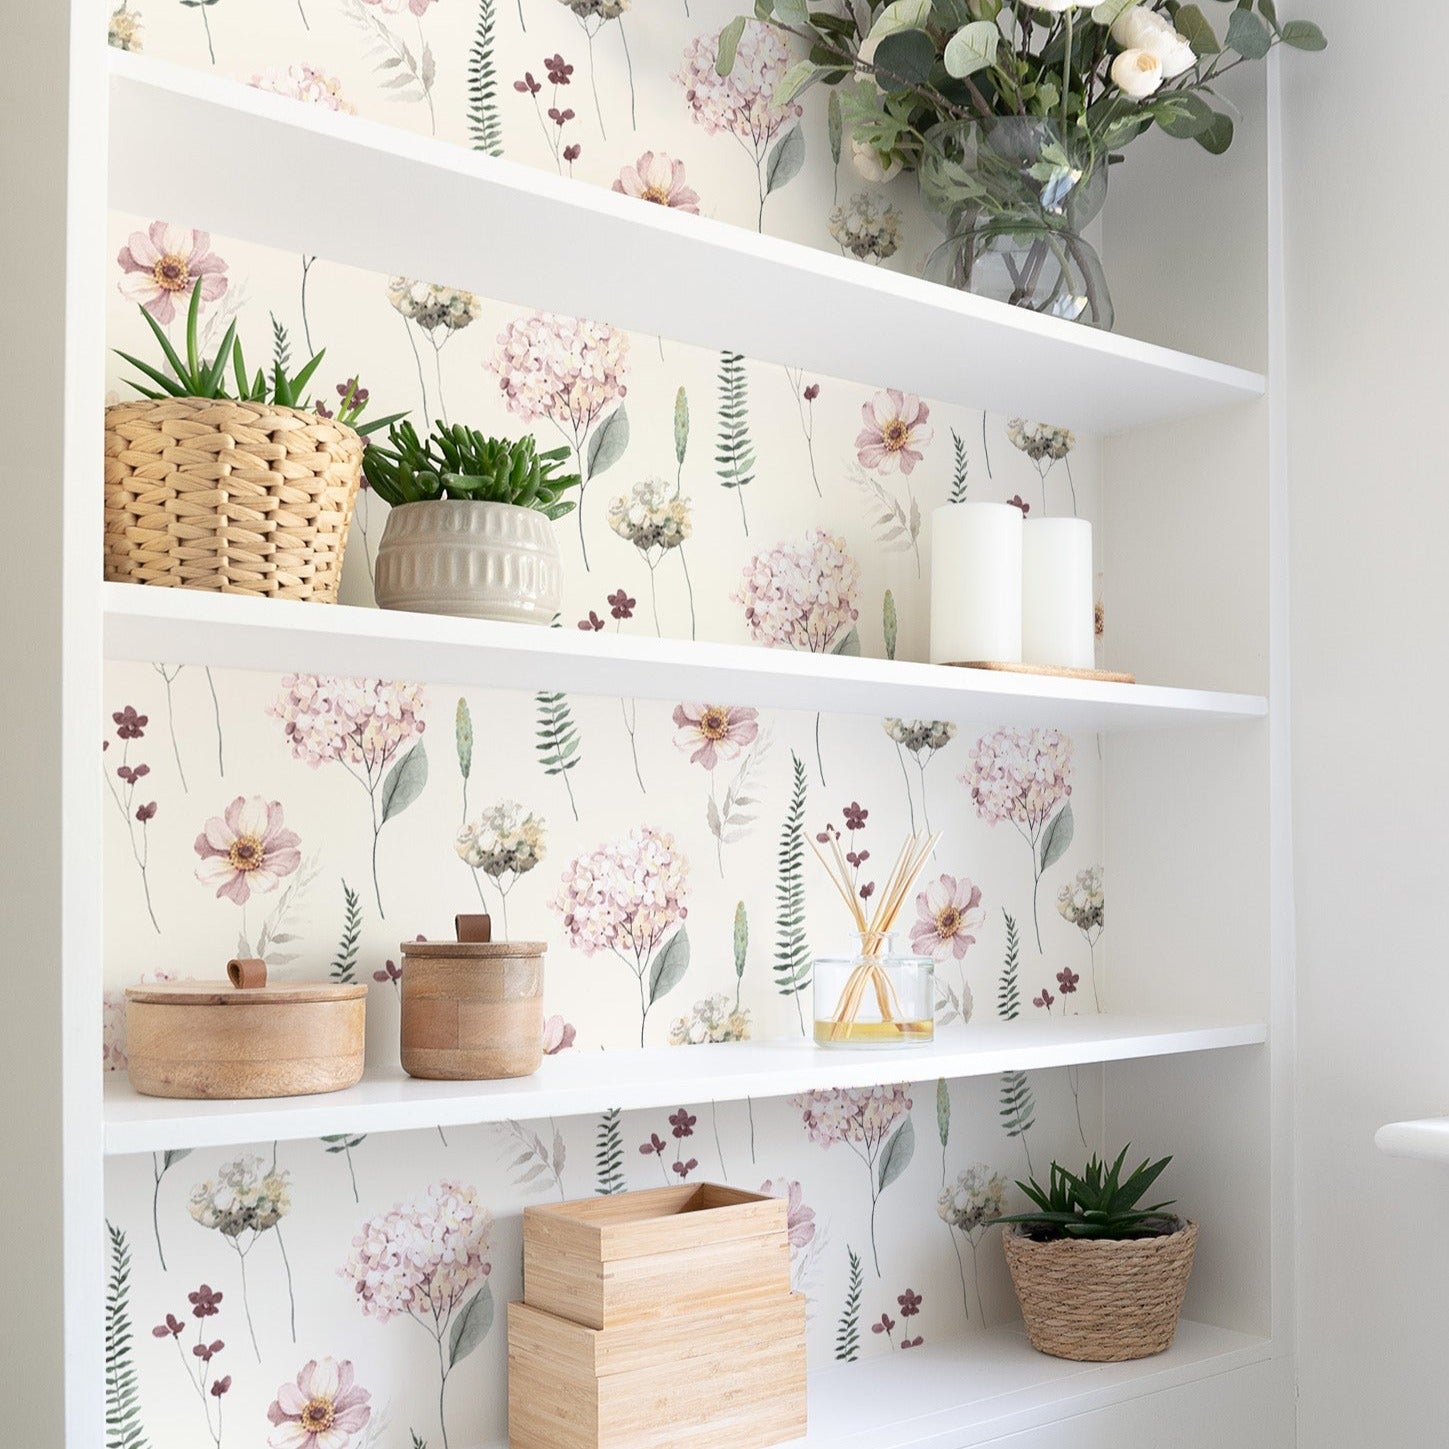 A bright and airy space featuring the Delicate Hydrangea Wallpaper on the wall behind white shelves adorned with potted plants and decorative items, contributing to a peaceful and natural atmosphere.